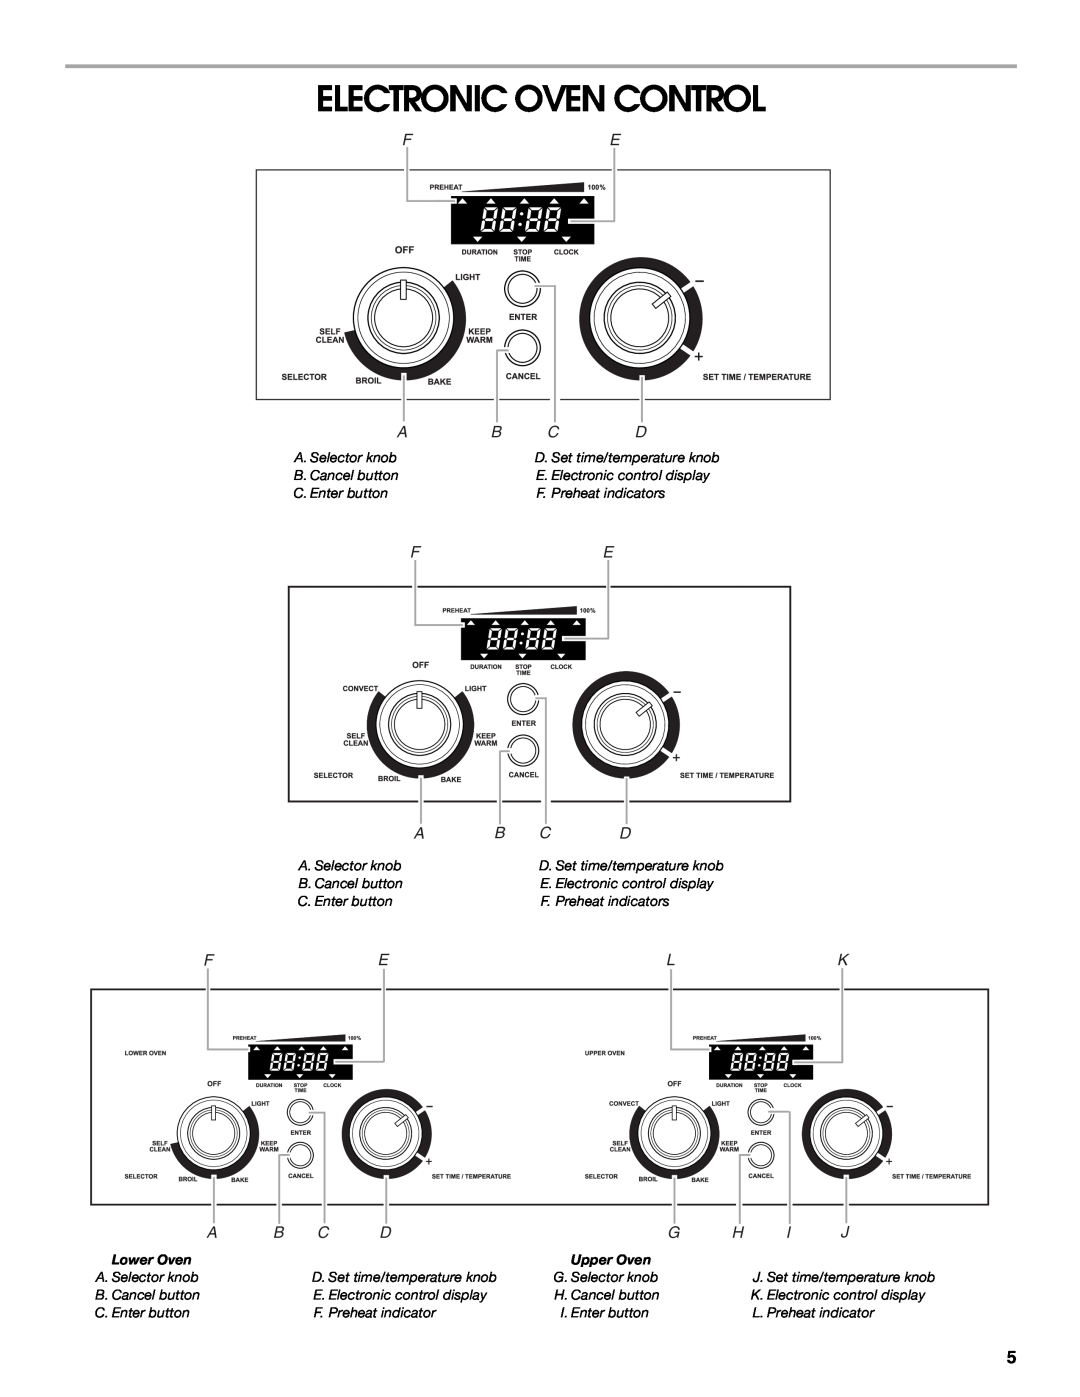 Whirlpool IBS550P manual Electronic Oven Control, Fe Ab Cd, Fe A B C D, Felk, Lower Oven, Upper Oven 